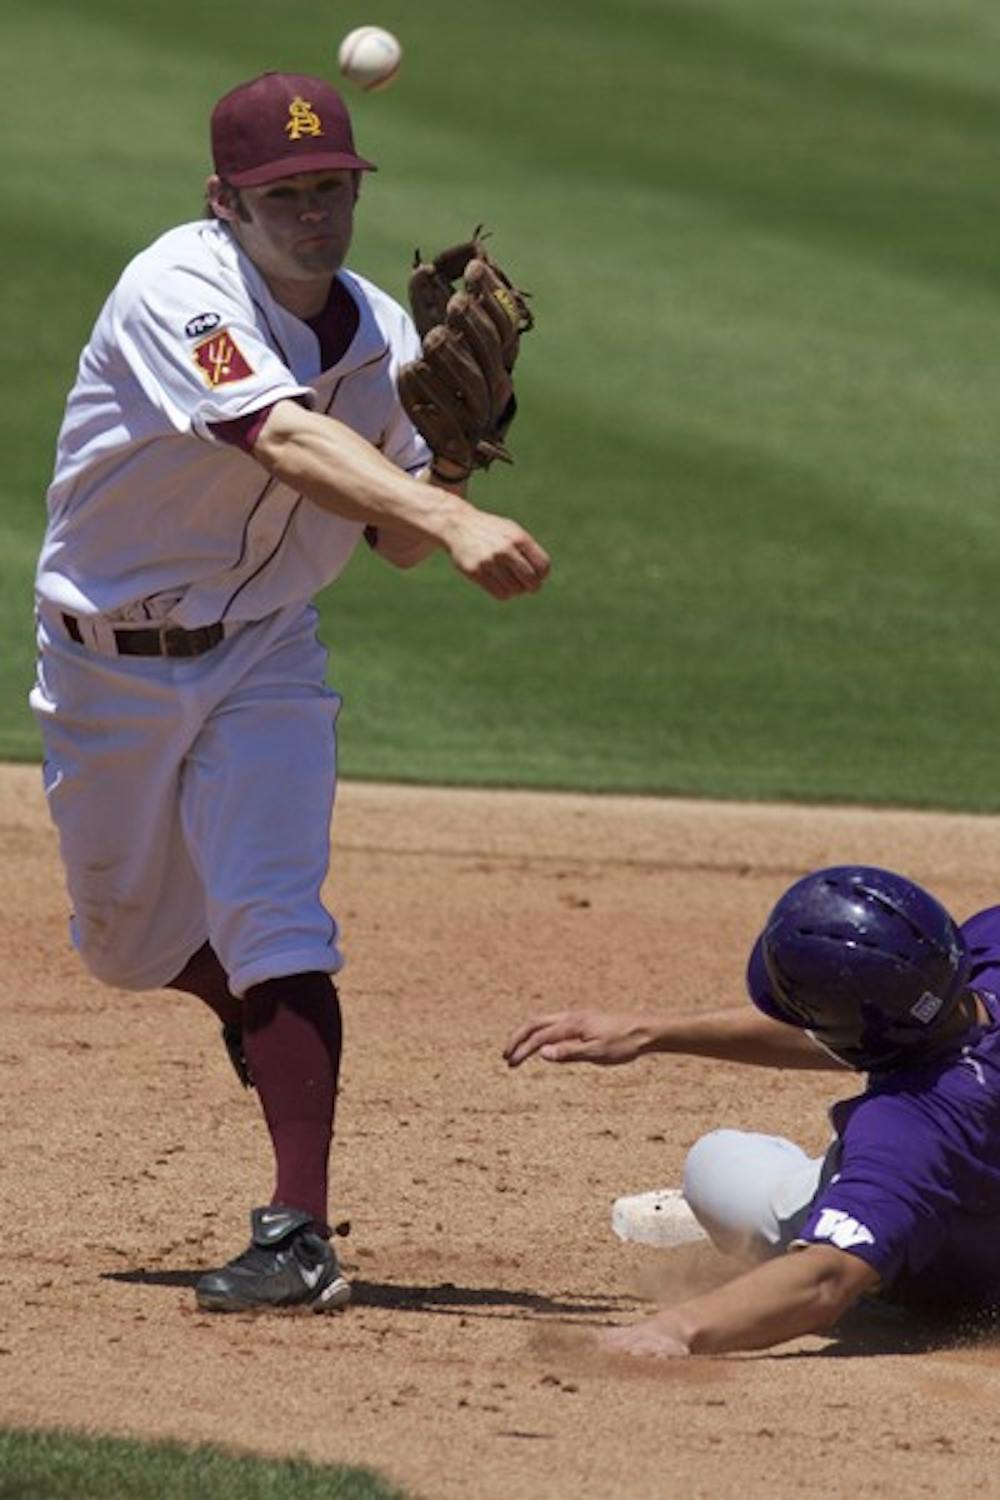 Turning Two: ASU junior Zack MacPhee attempts to turn a double play during a game against Washington last season. The infielder leads a highly ranked Sun Devil squad against a deep 2011 Pac-10 conference. (Photo by Scott Stuk)